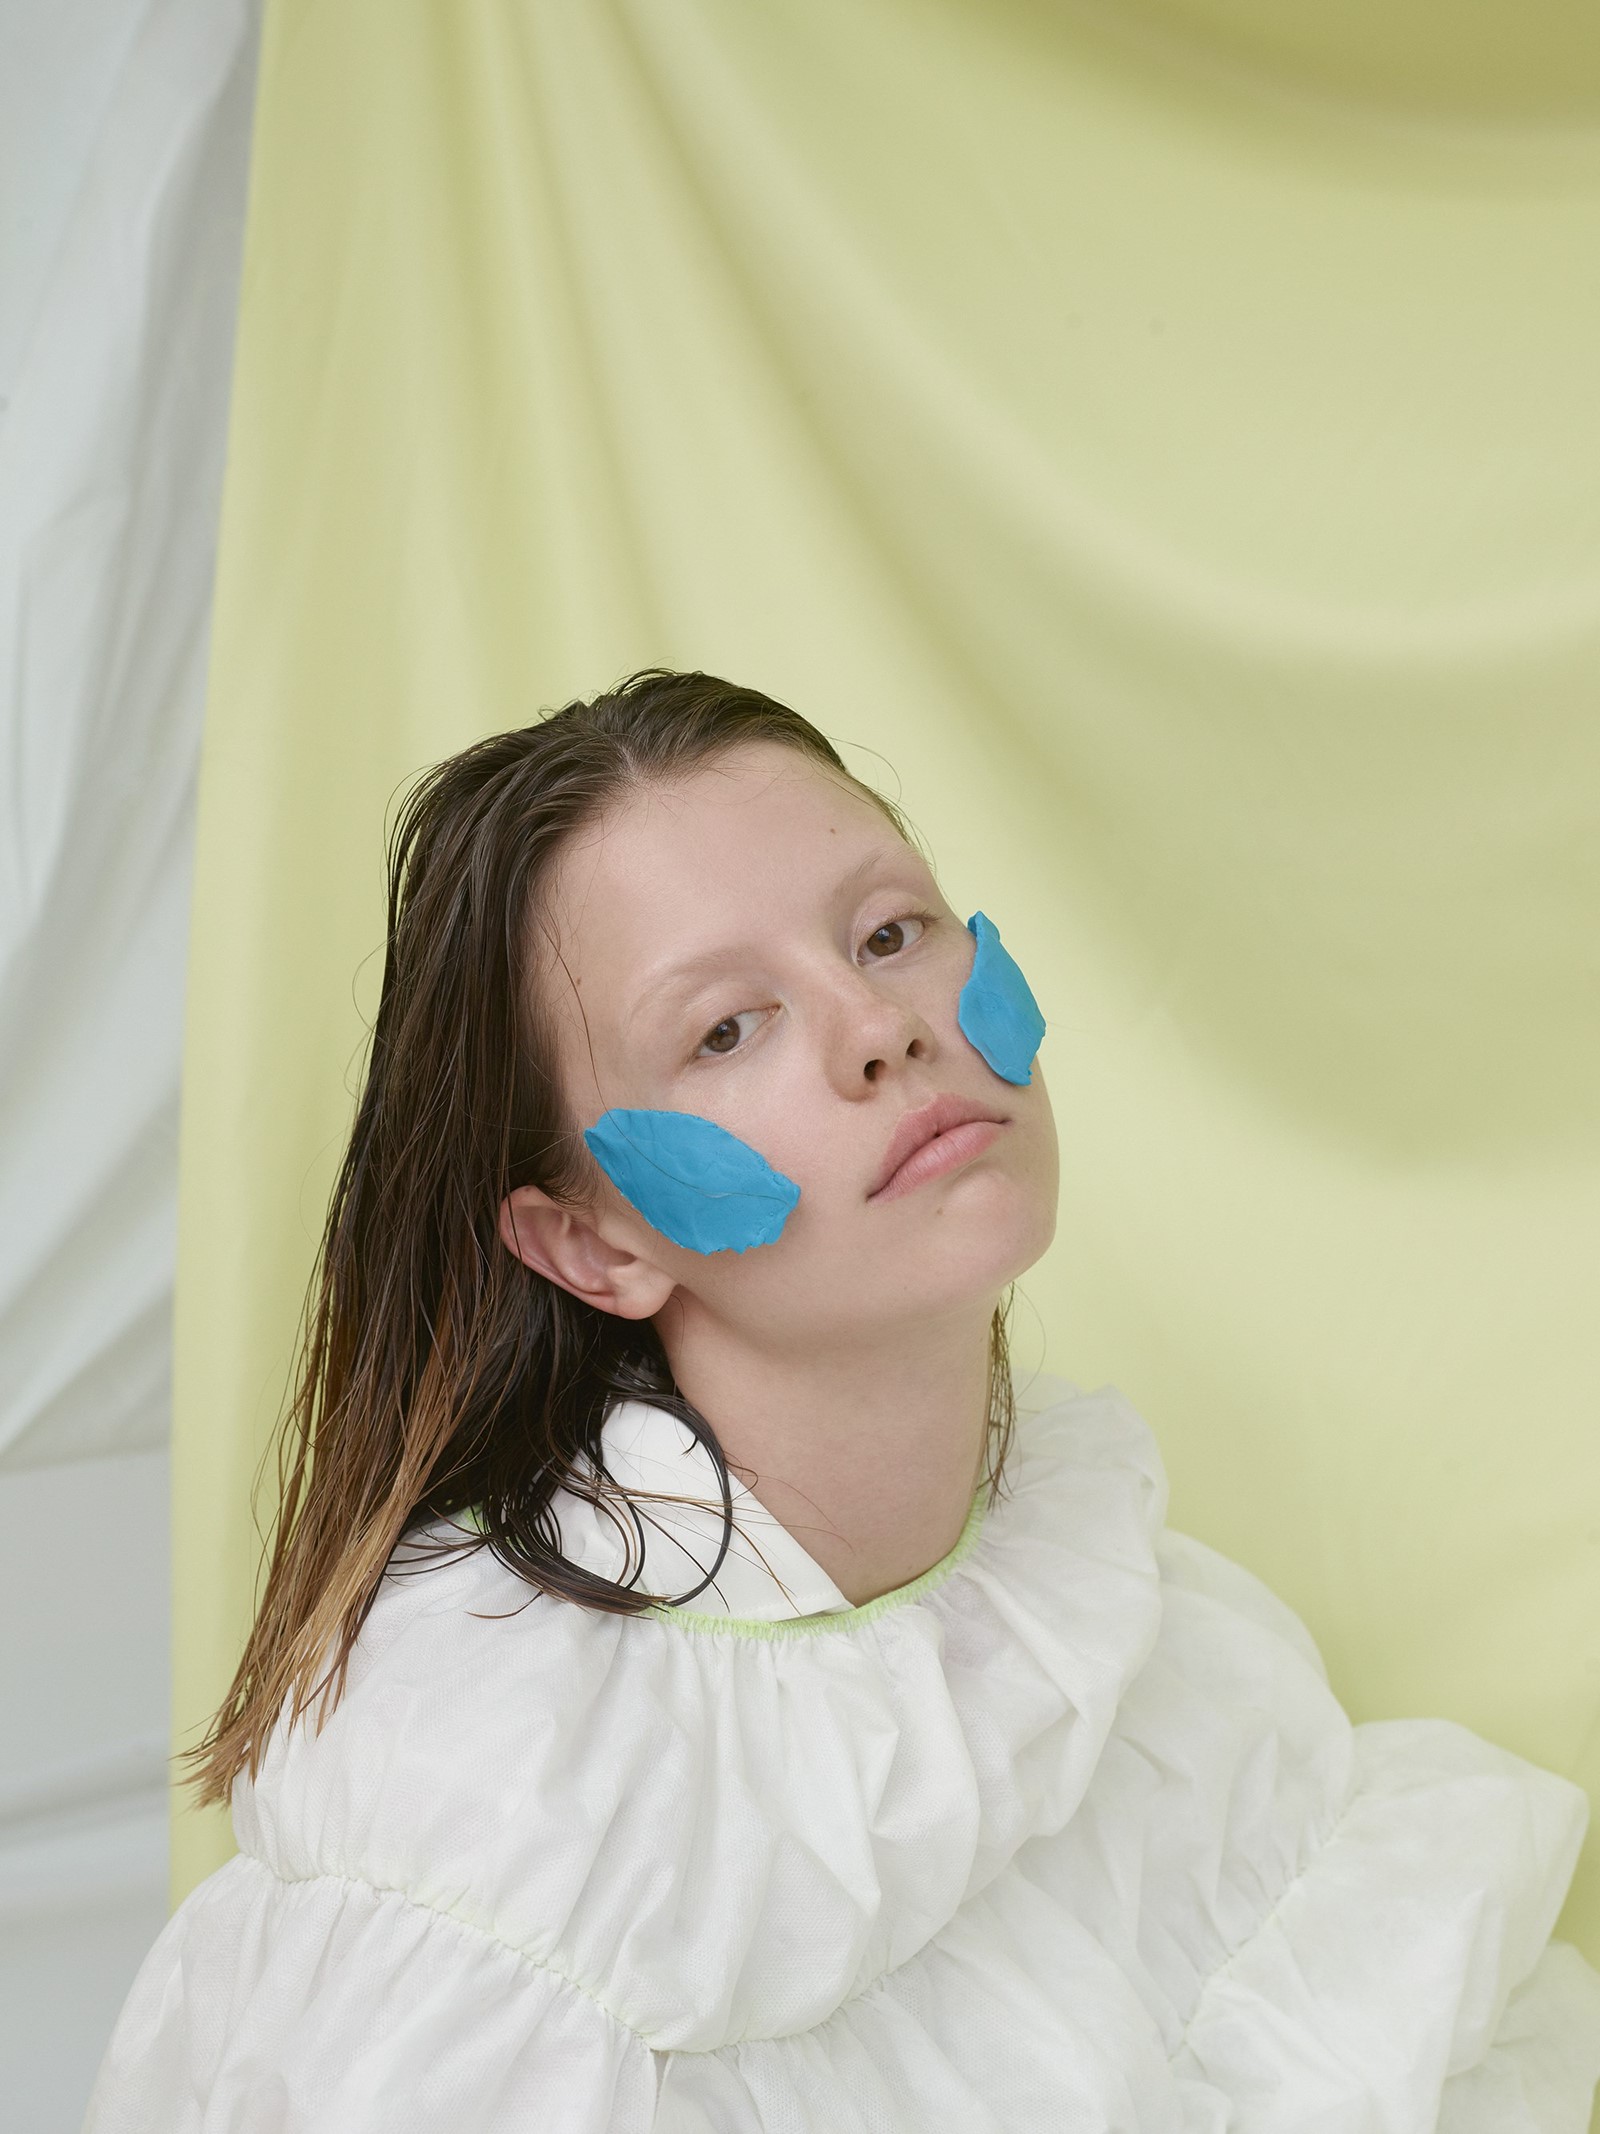 Photography by Viviane Sassen, Styling by Katie Shillingford